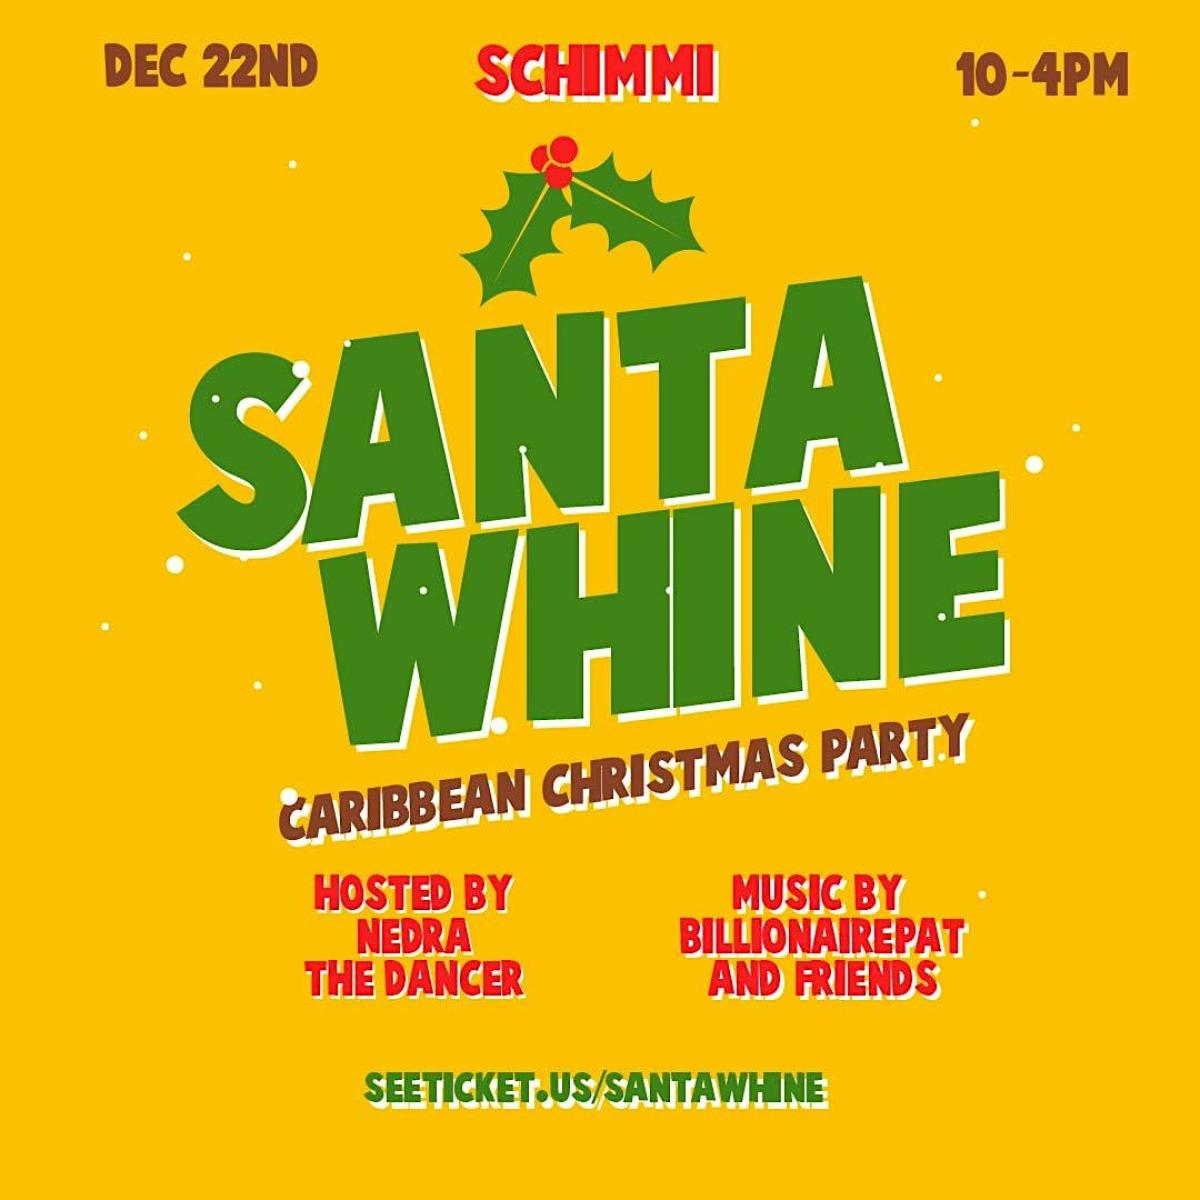 Santa Whine: A Caribbean Christmas Party flyer or graphic.